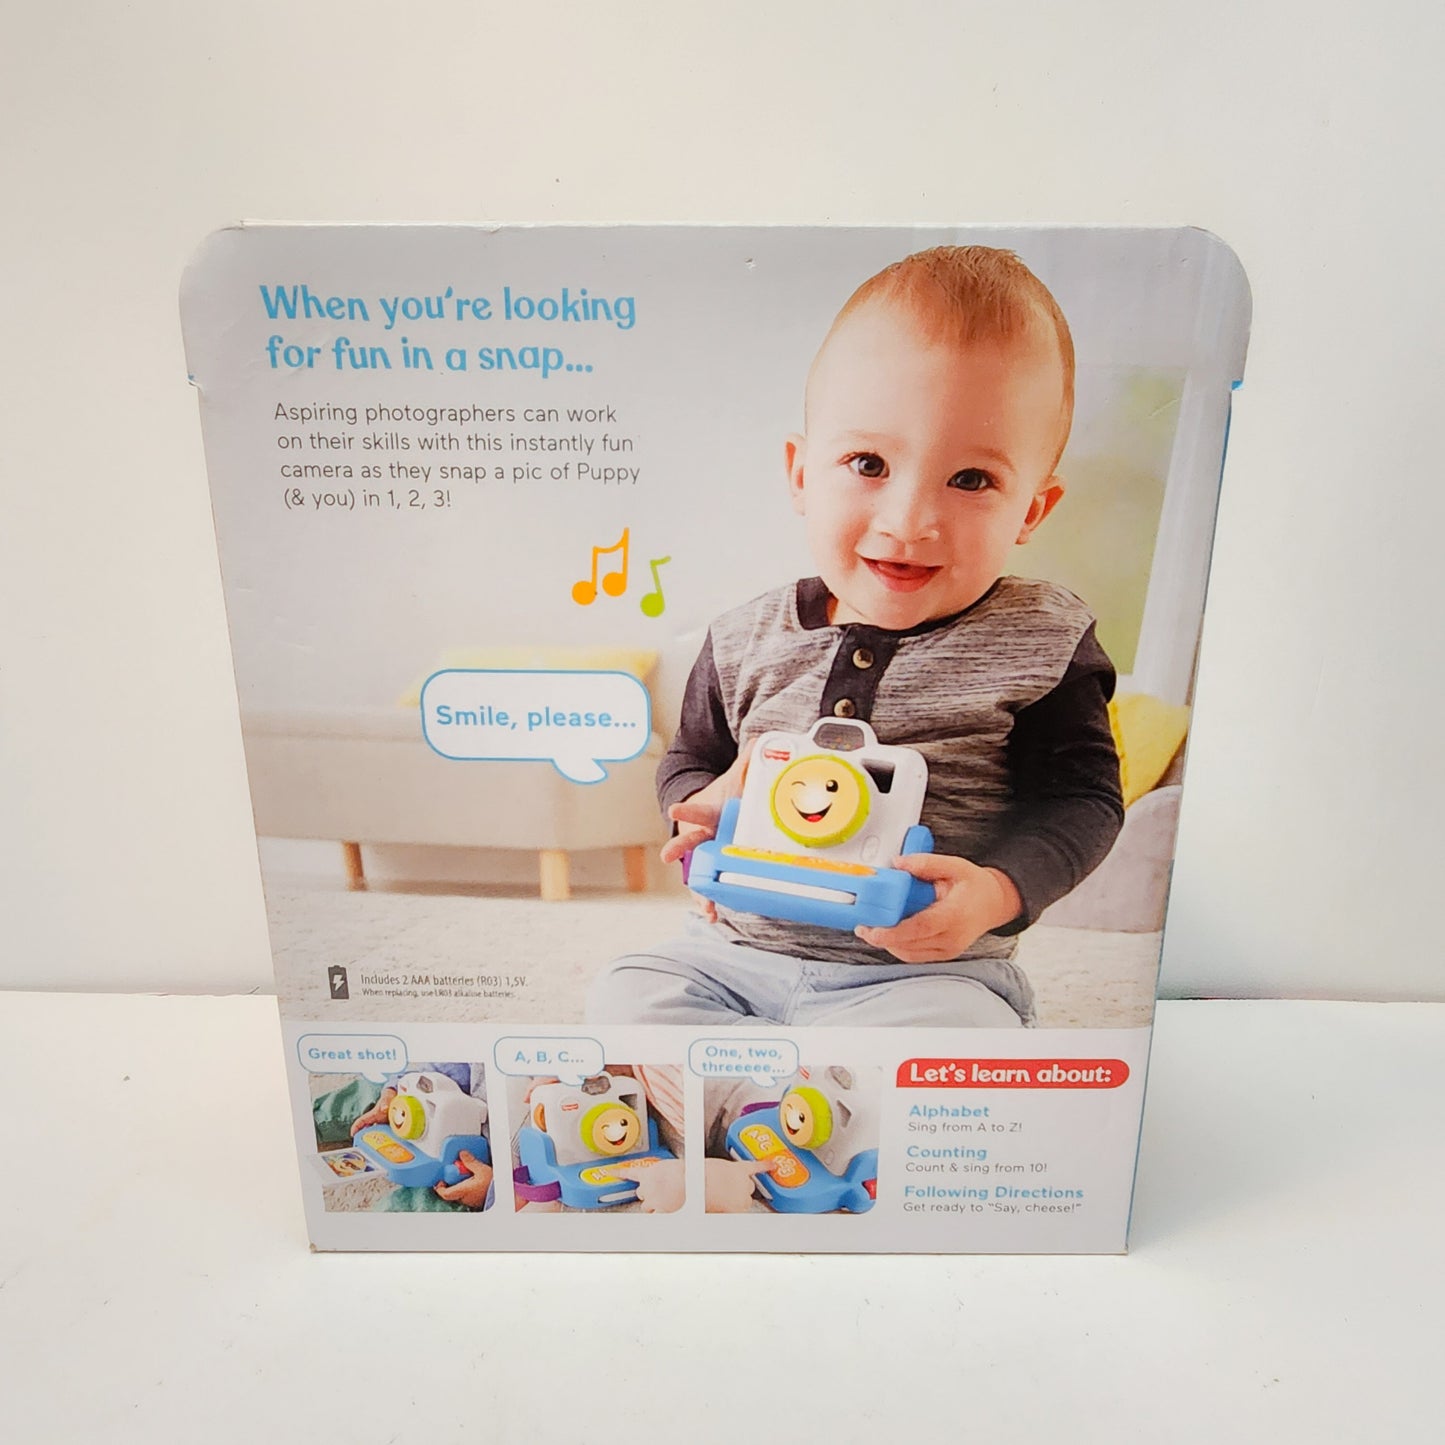 Fisher-Price Laugh and Learn Click and Learn Instant Camera Musical Toy Kids